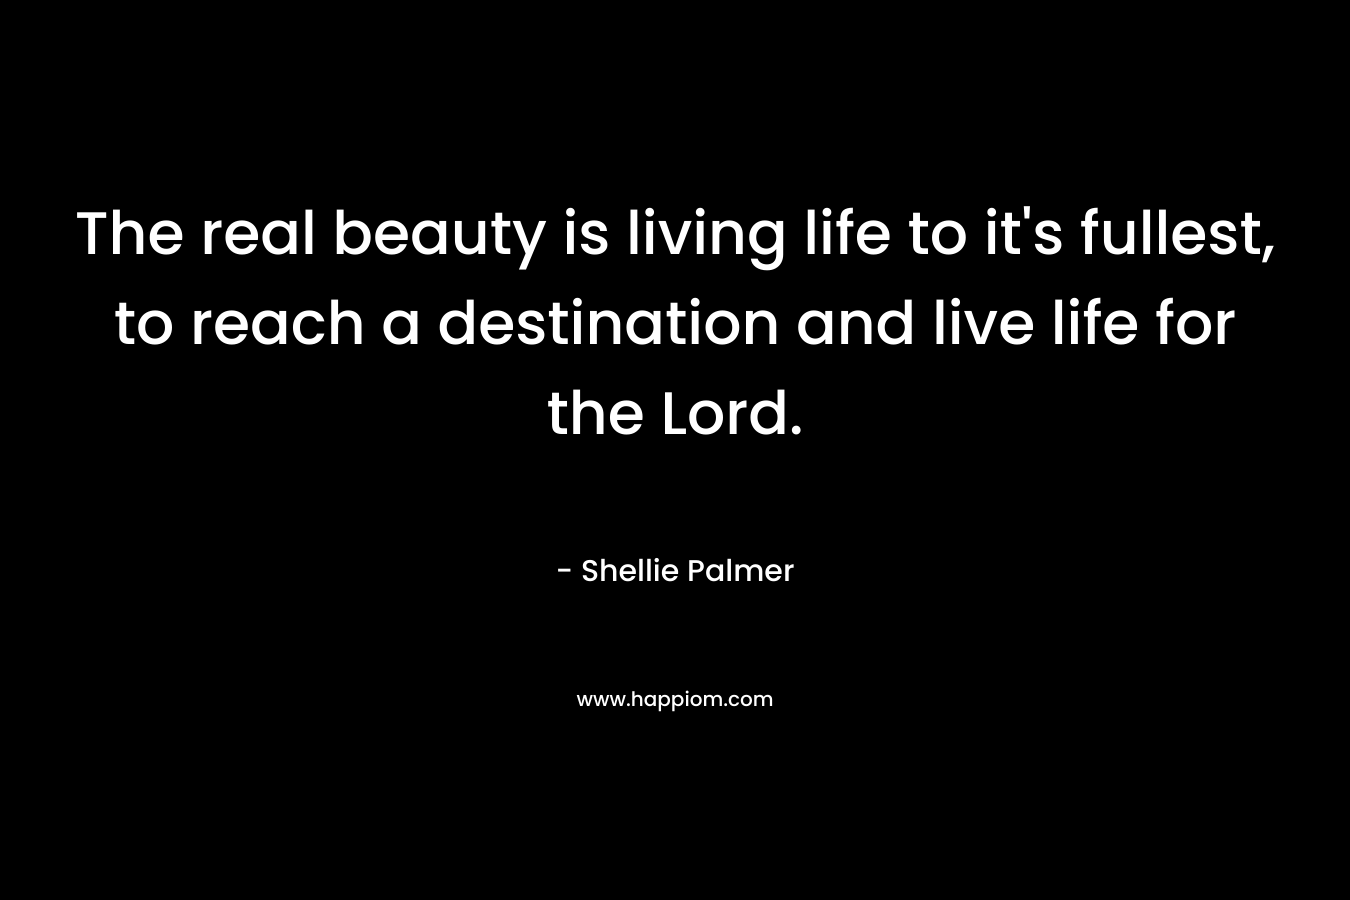 The real beauty is living life to it’s fullest, to reach a destination and live life for the Lord. – Shellie Palmer